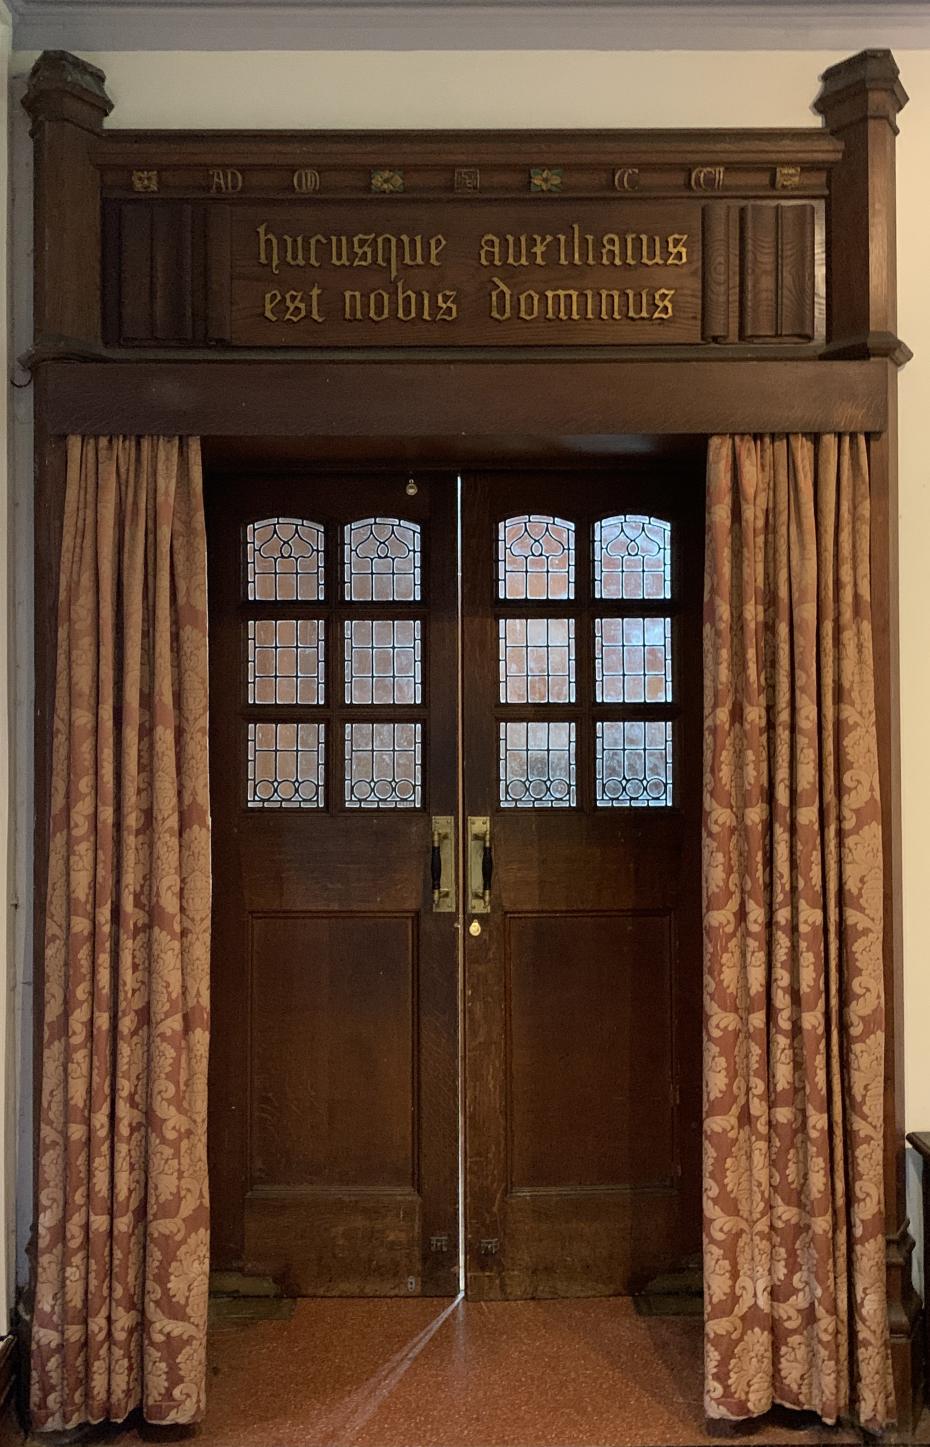 The Chapel door with the inscription above it, photographed by Hannah Sargent (Communications Officer 2013), 2020 (archive reference: GCPH 2/4/17).